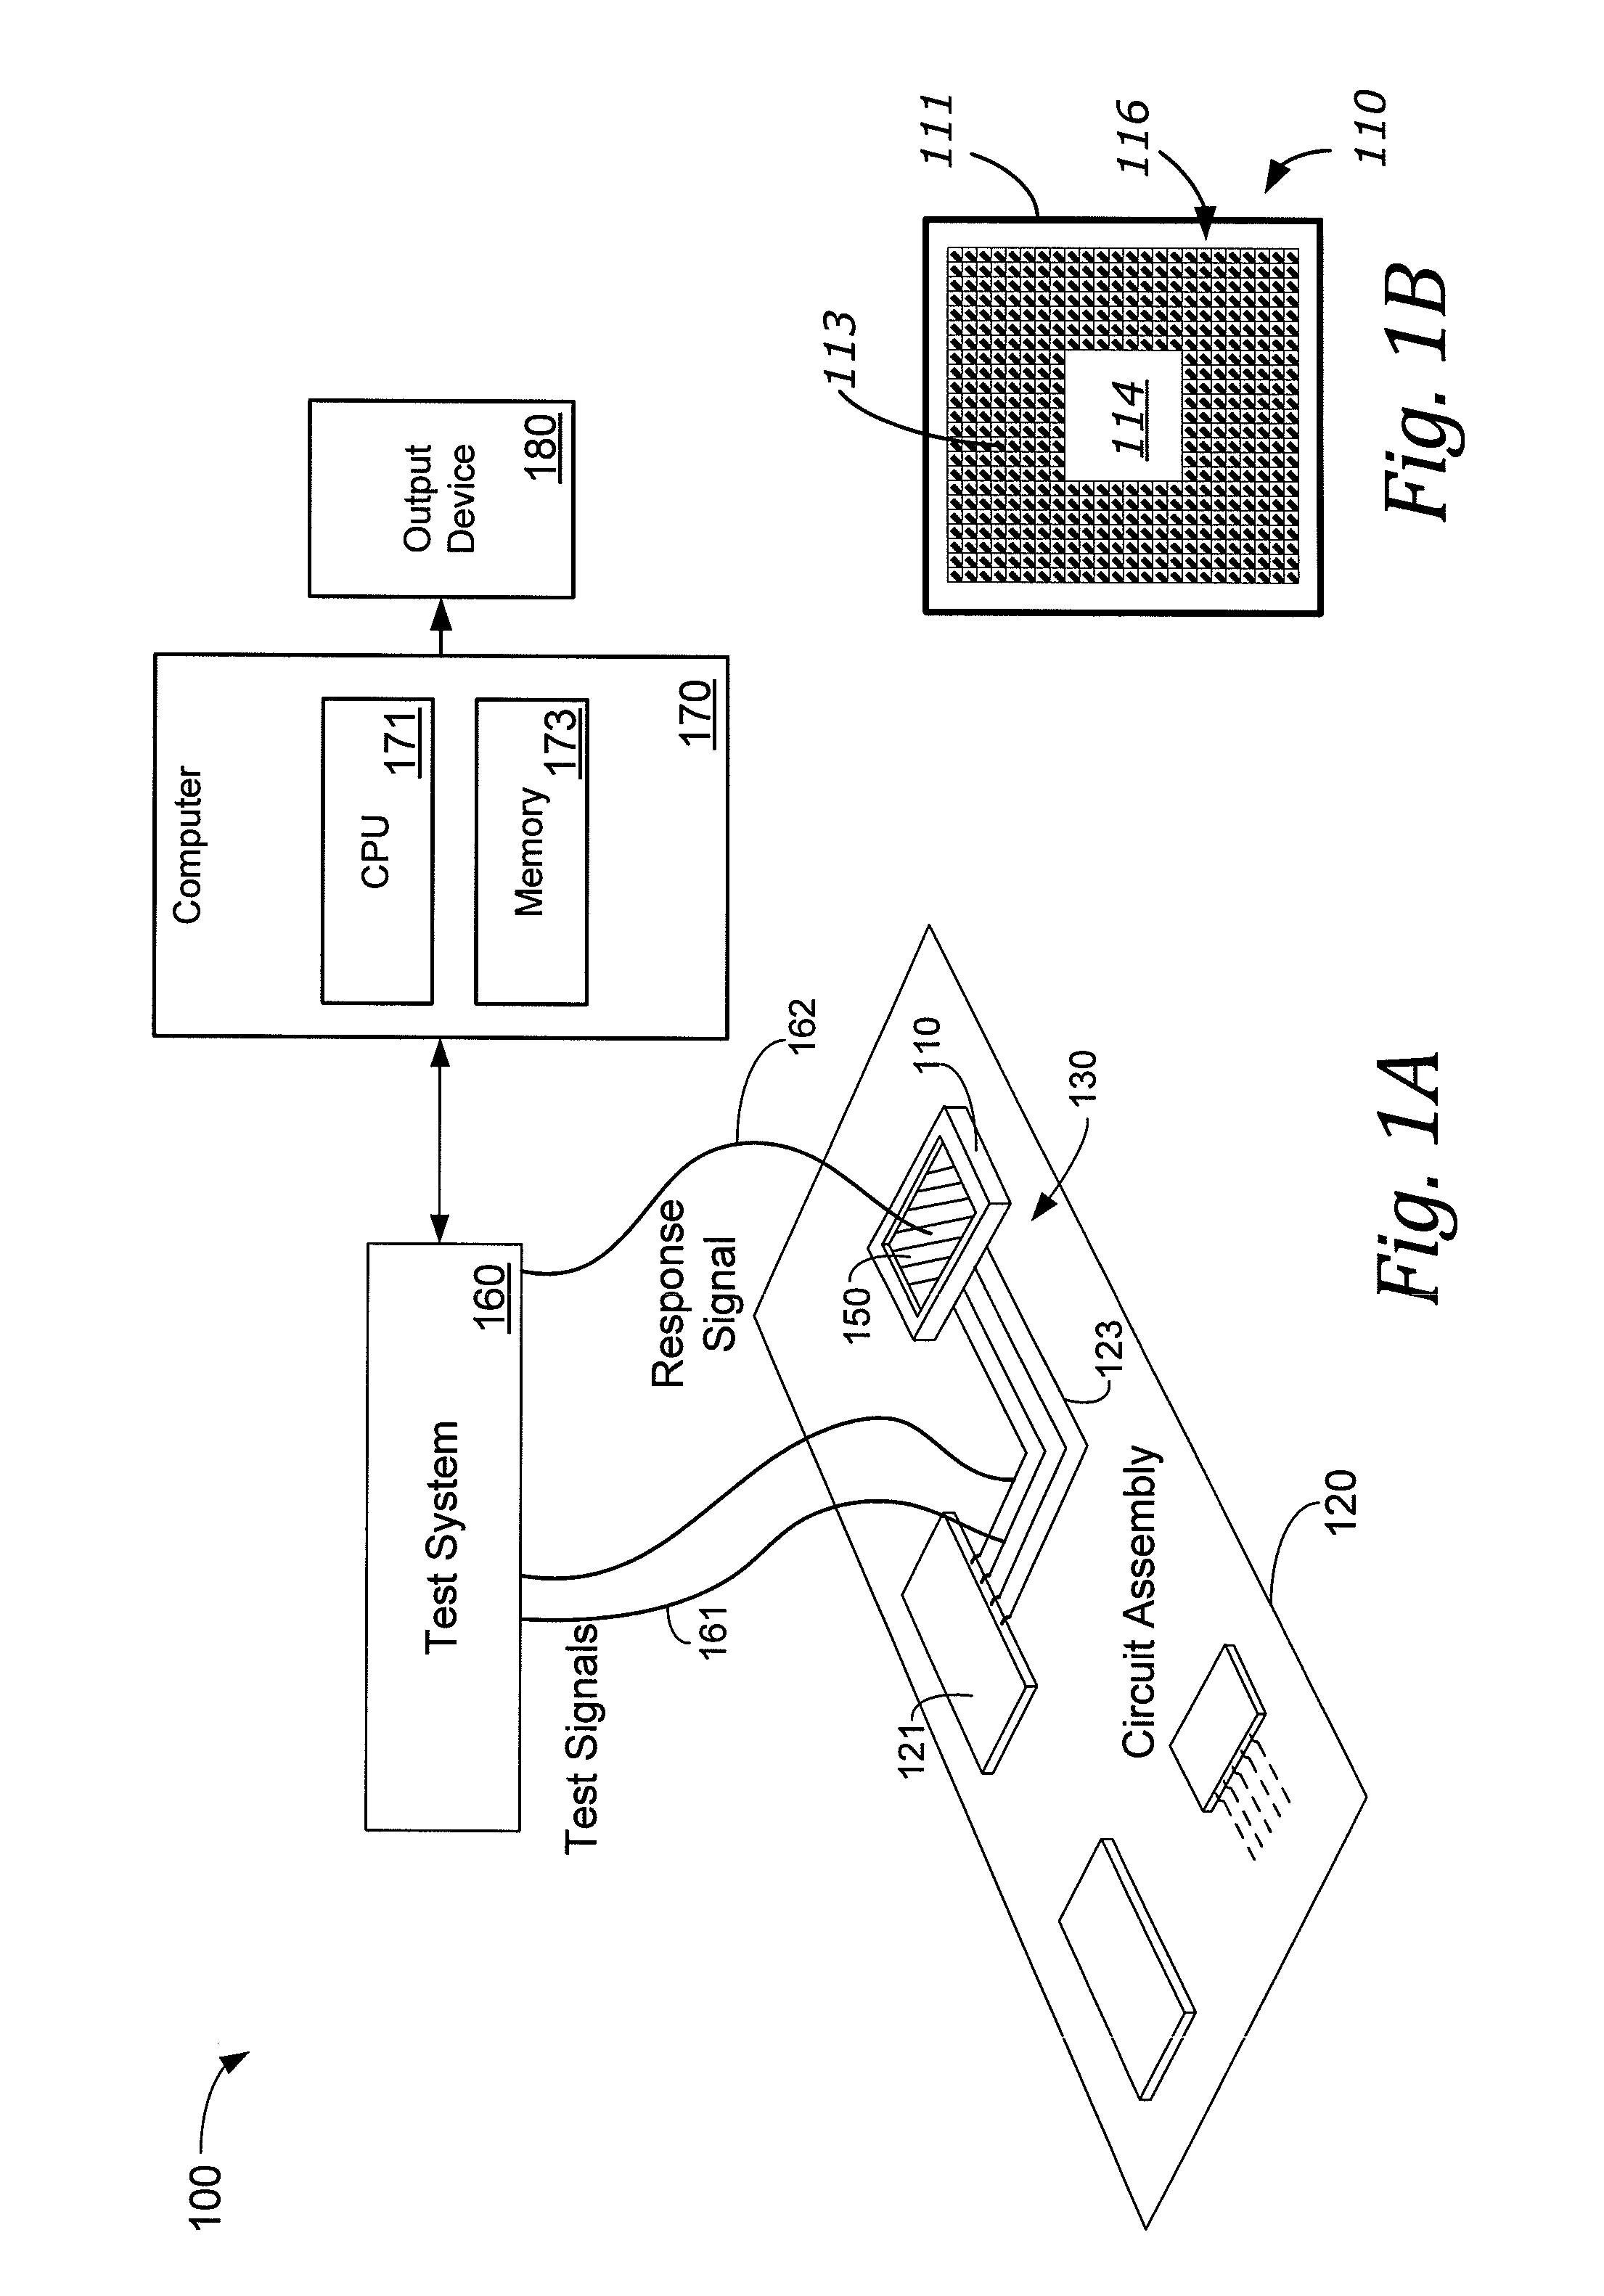 Low capacitance probe for testing circuit assembly